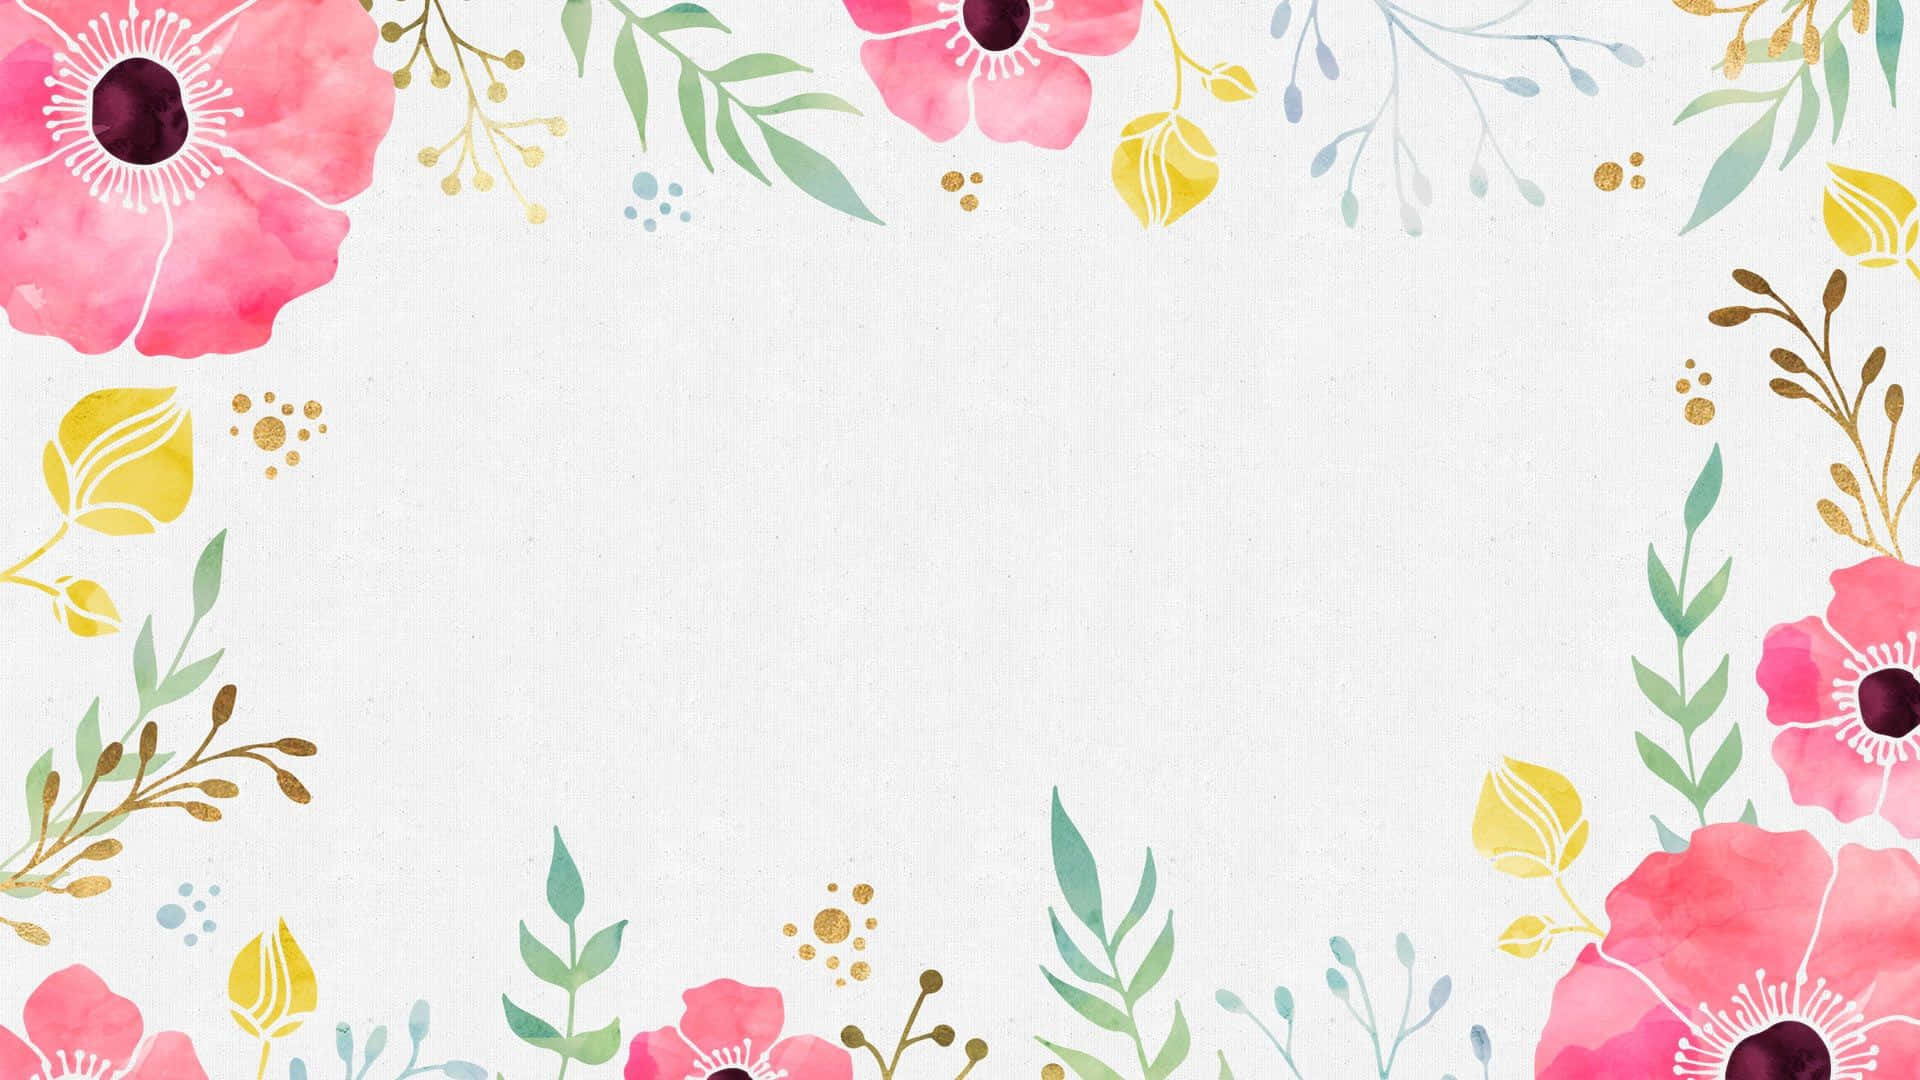 Pretty and Poetic Watercolor Floural Wallpaper